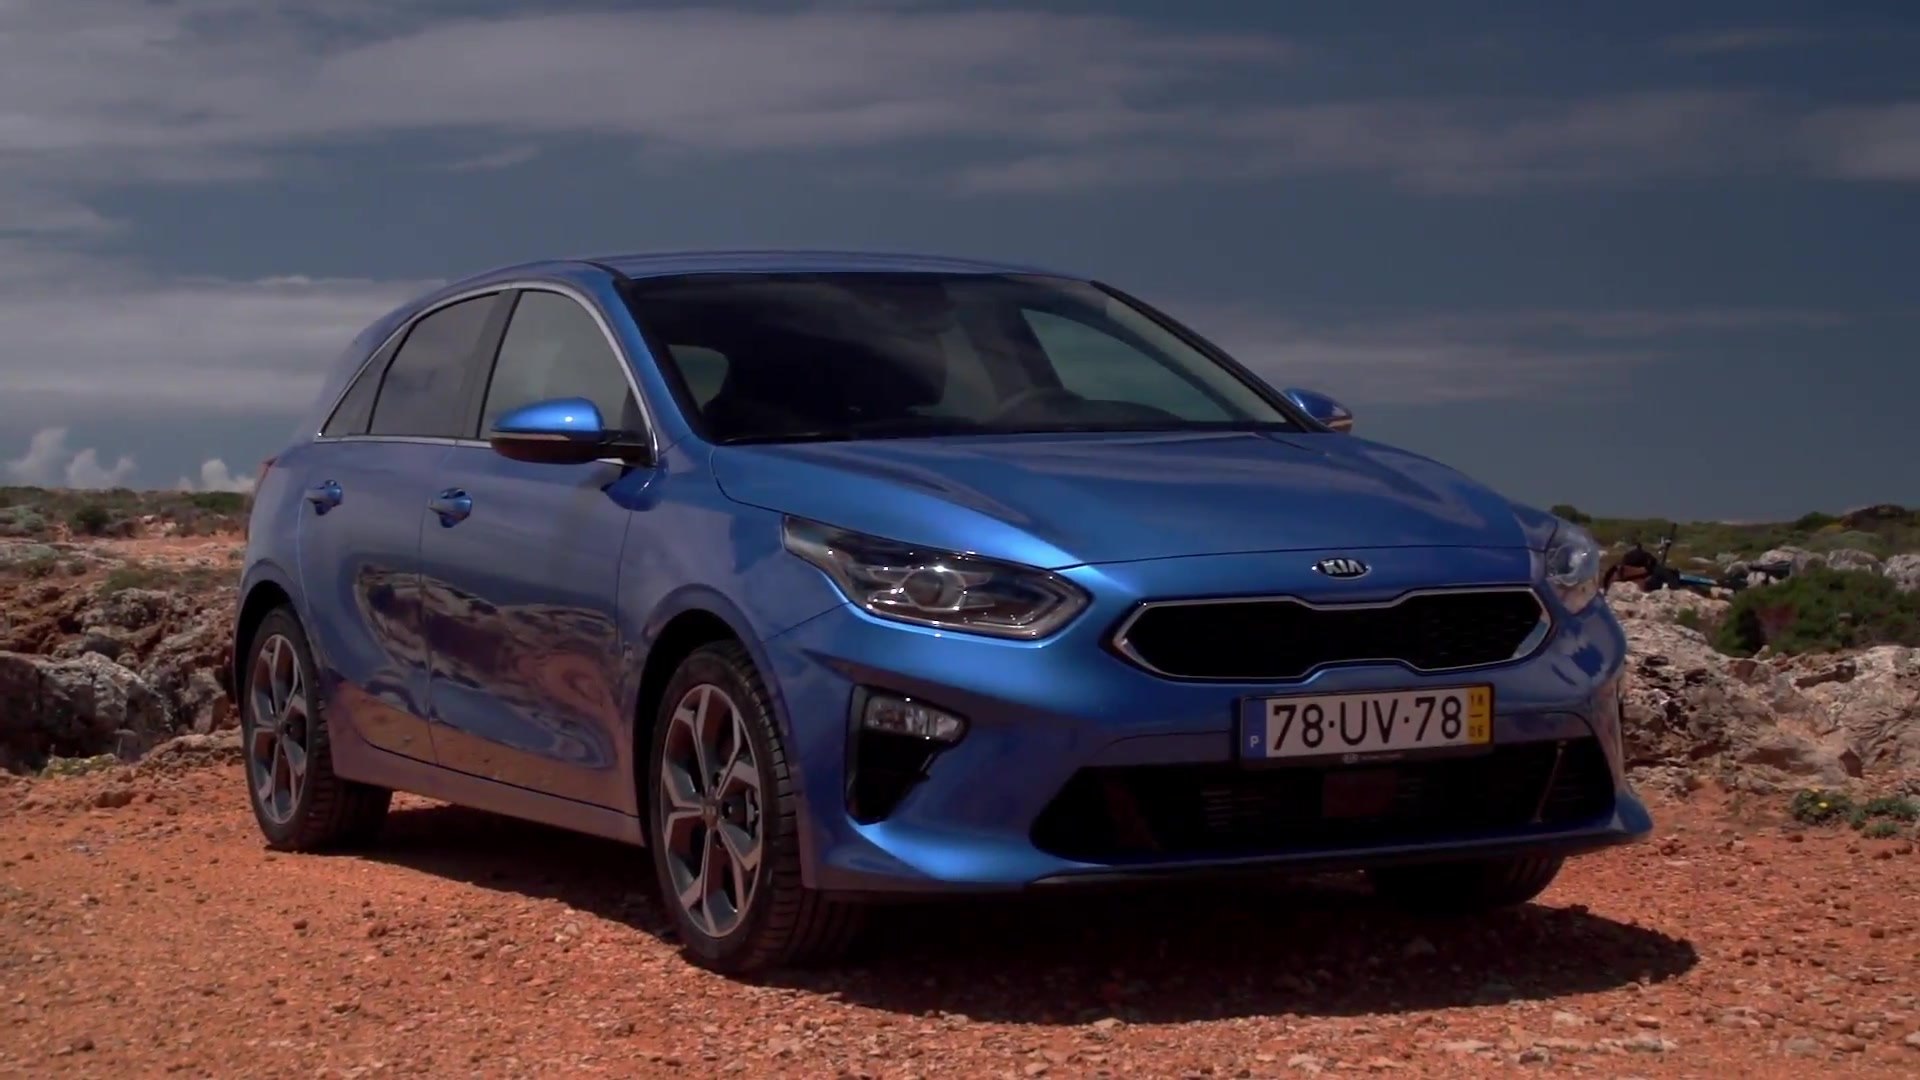 The New Kia Ceed Exterior Design In Blue Flame Video Dailymotion